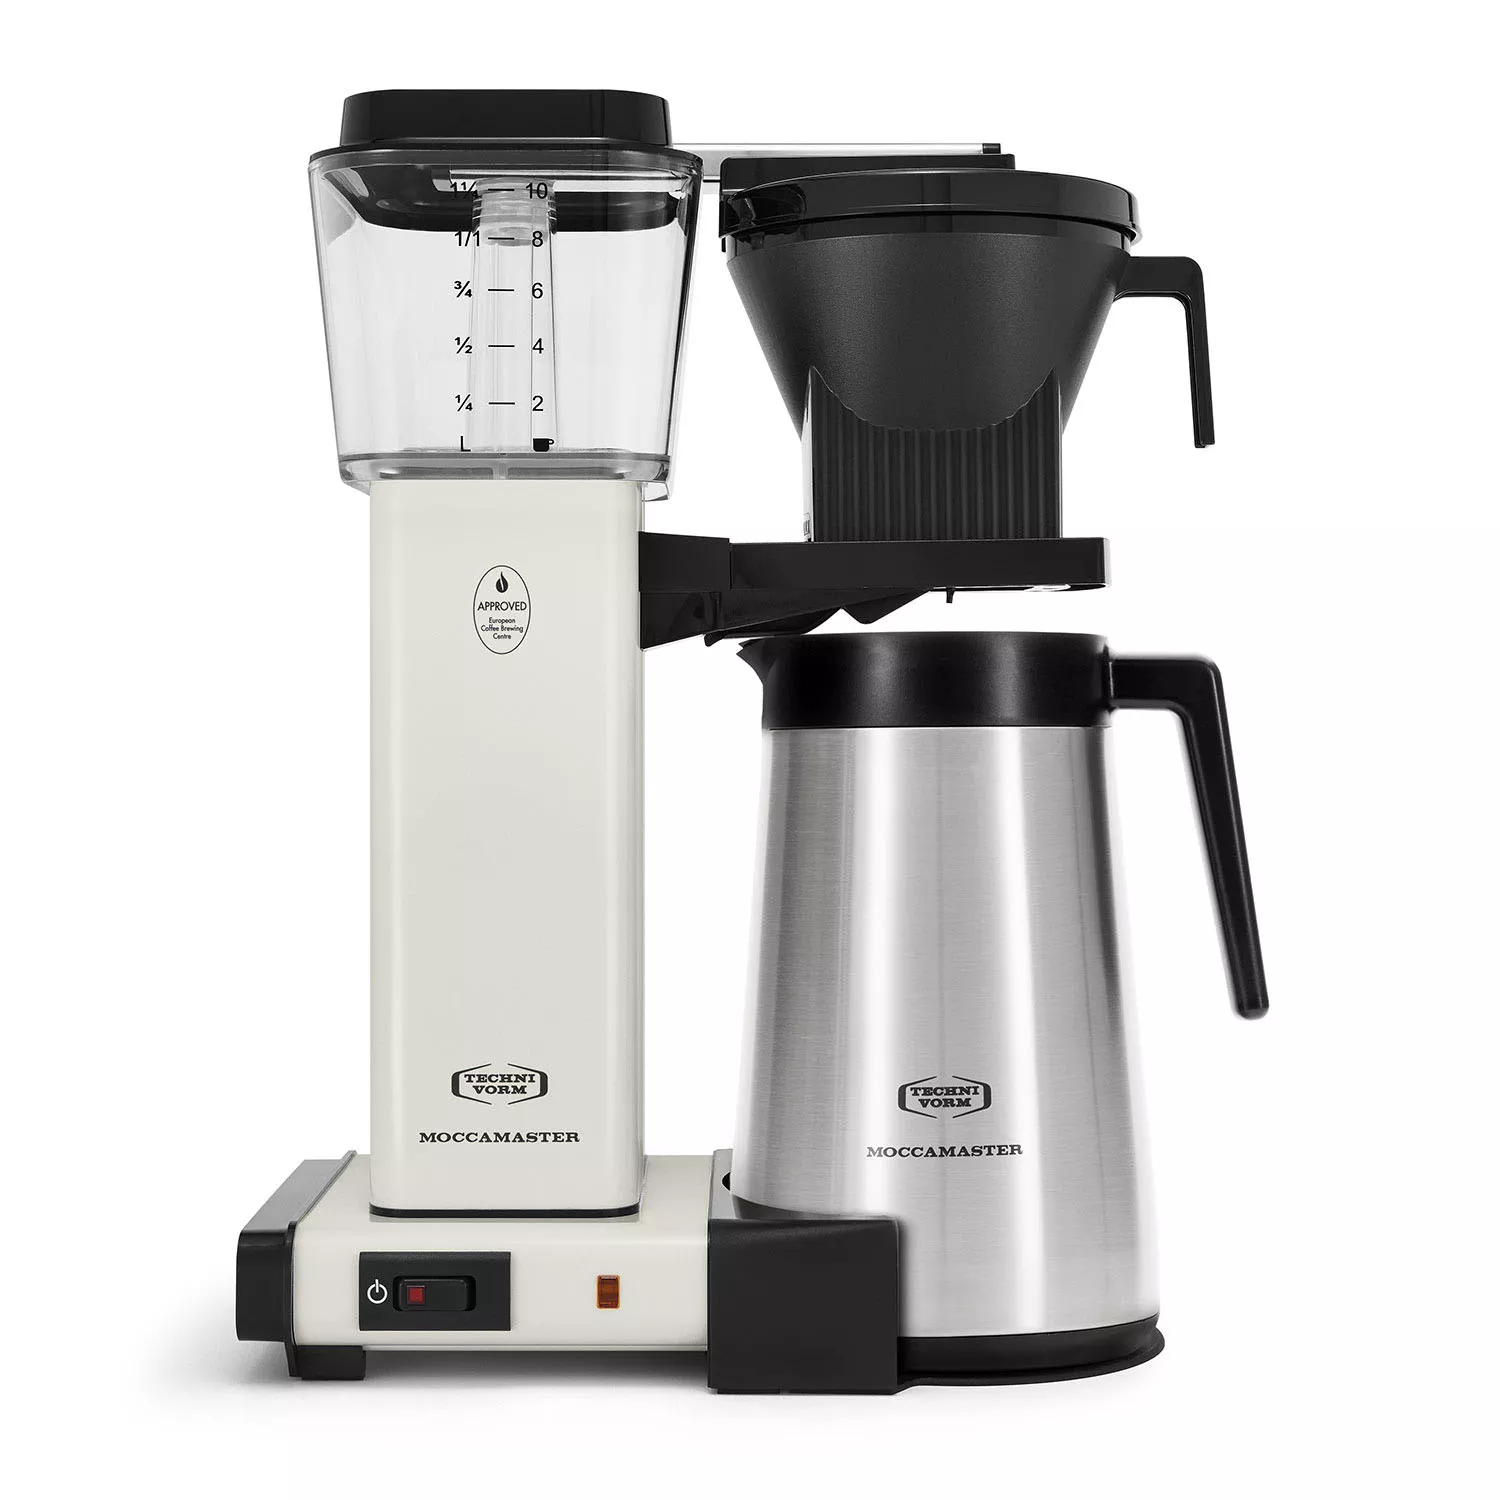 Moccamaster by Technivorm KBGT Coffee Maker with Thermal Carafe